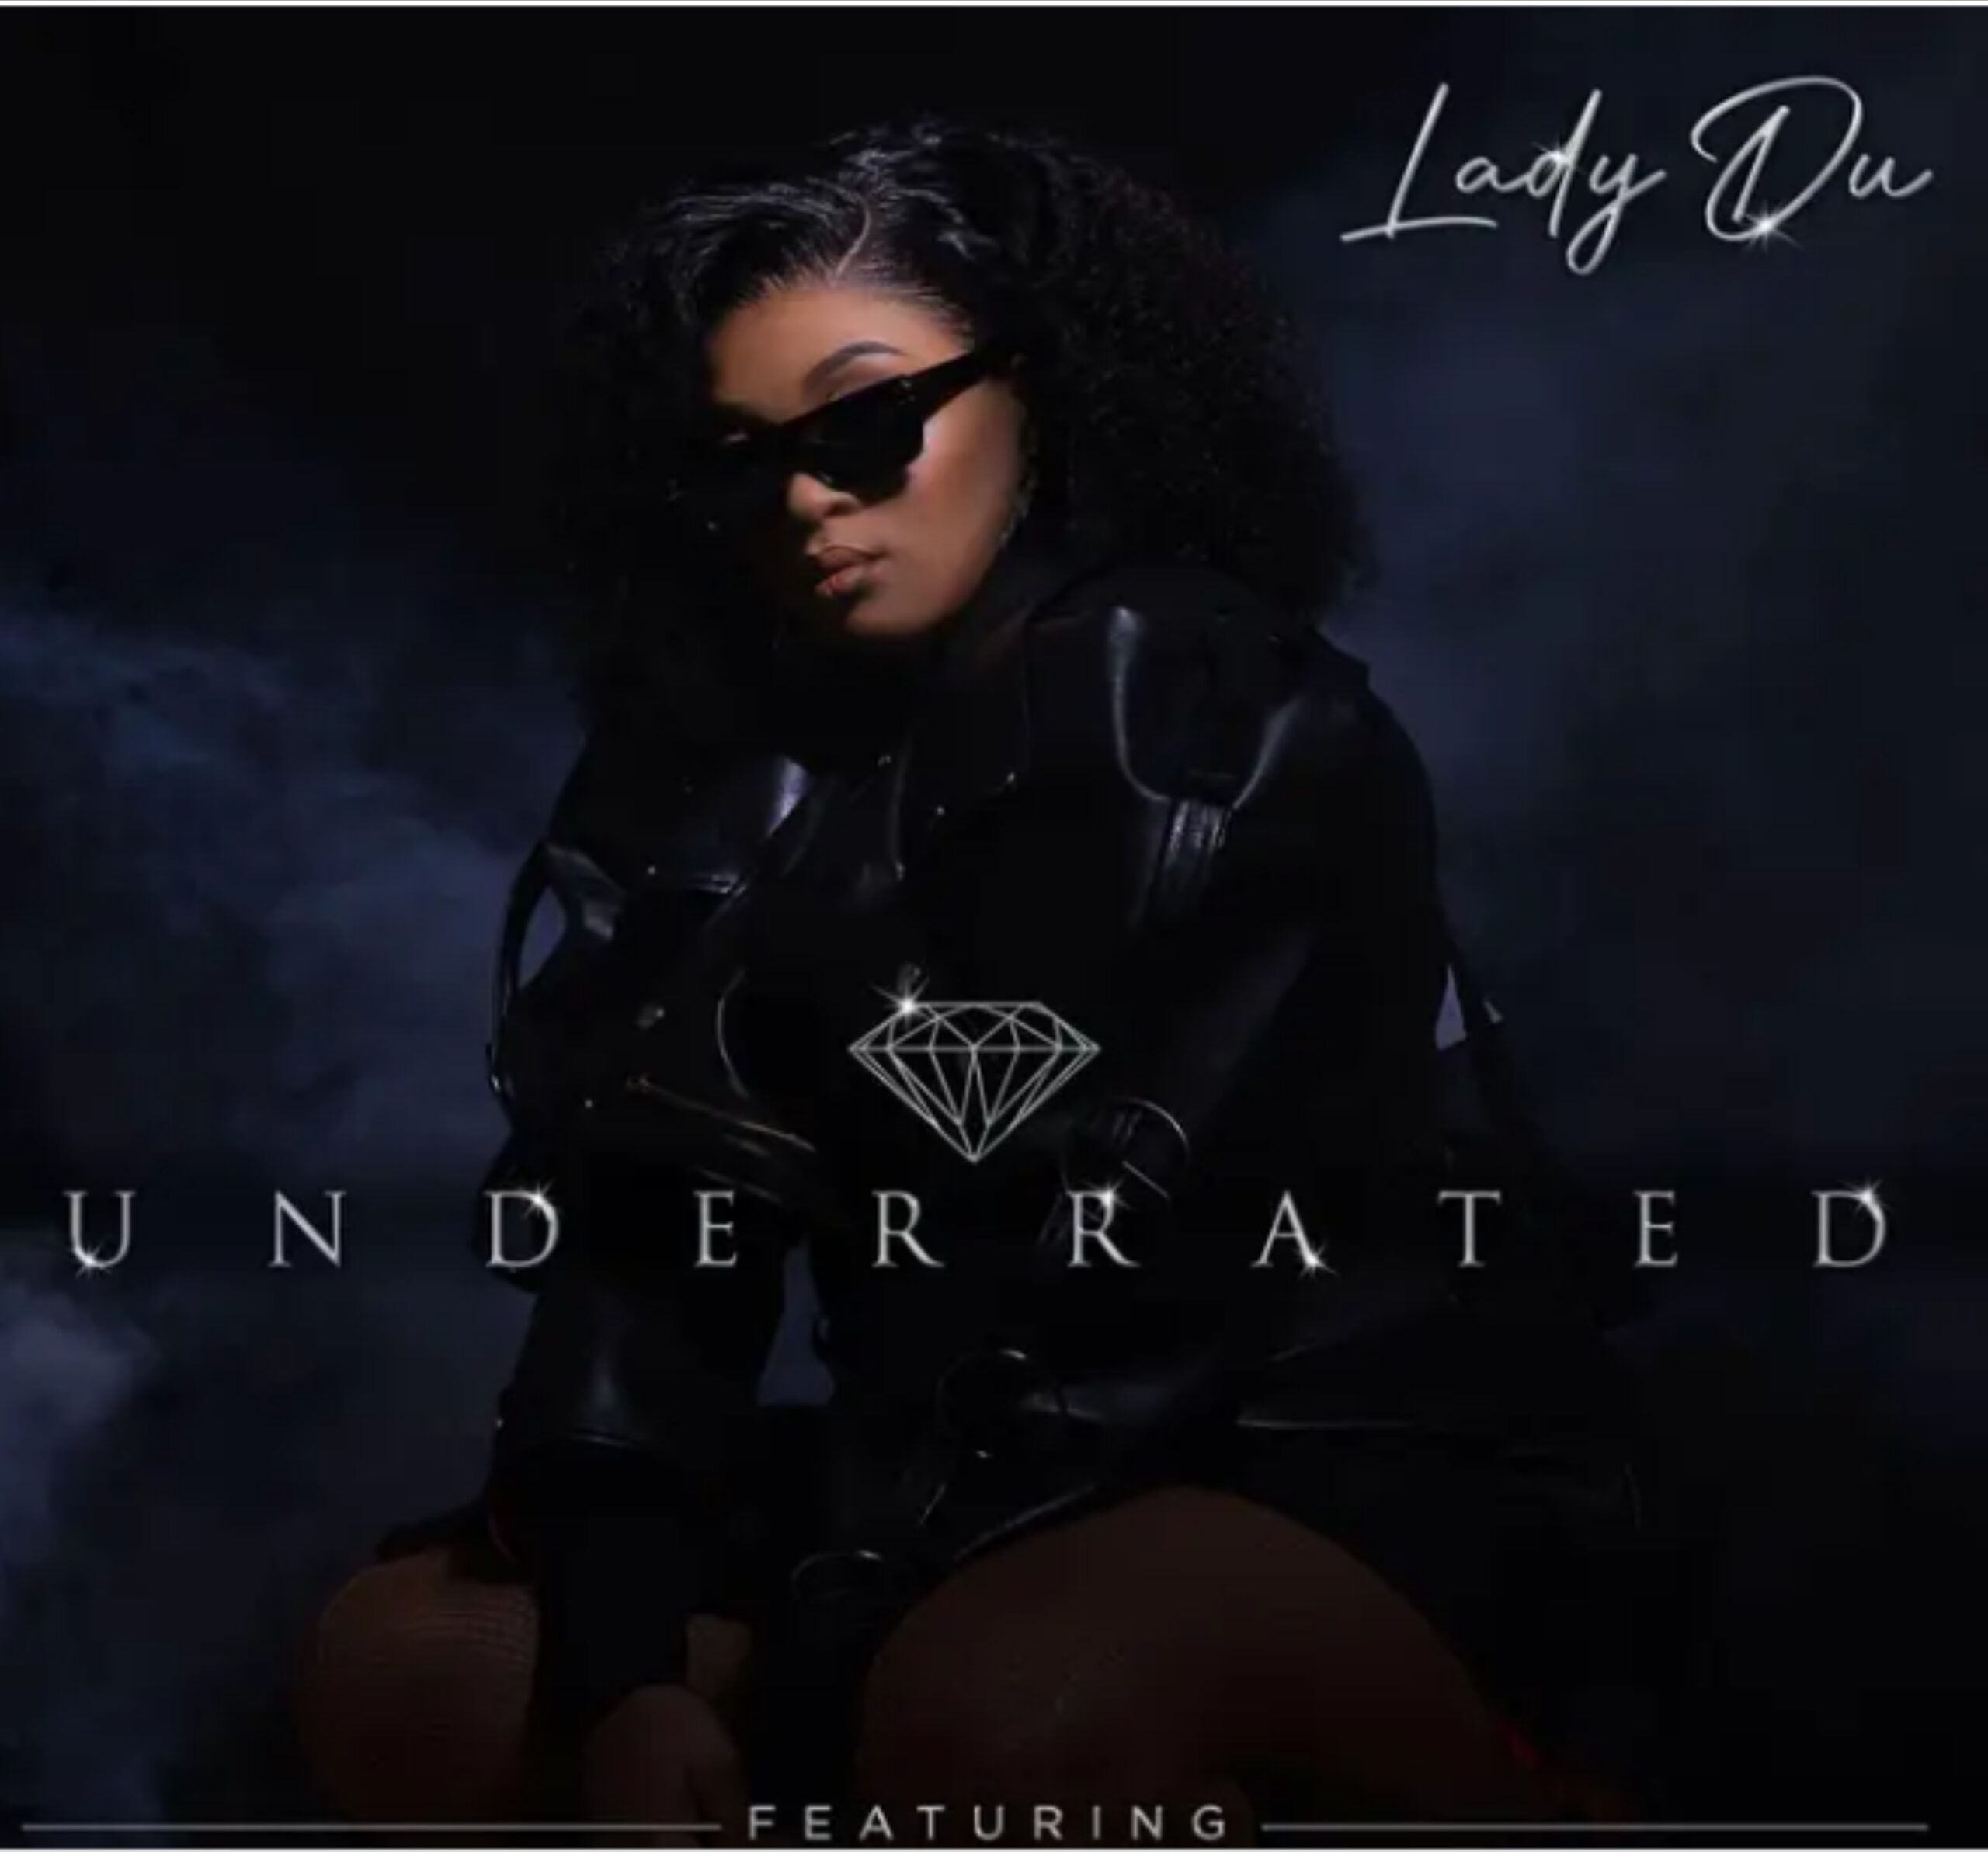 Lady Du prepares for the release of her sophomore studio album, titled "Underrated".